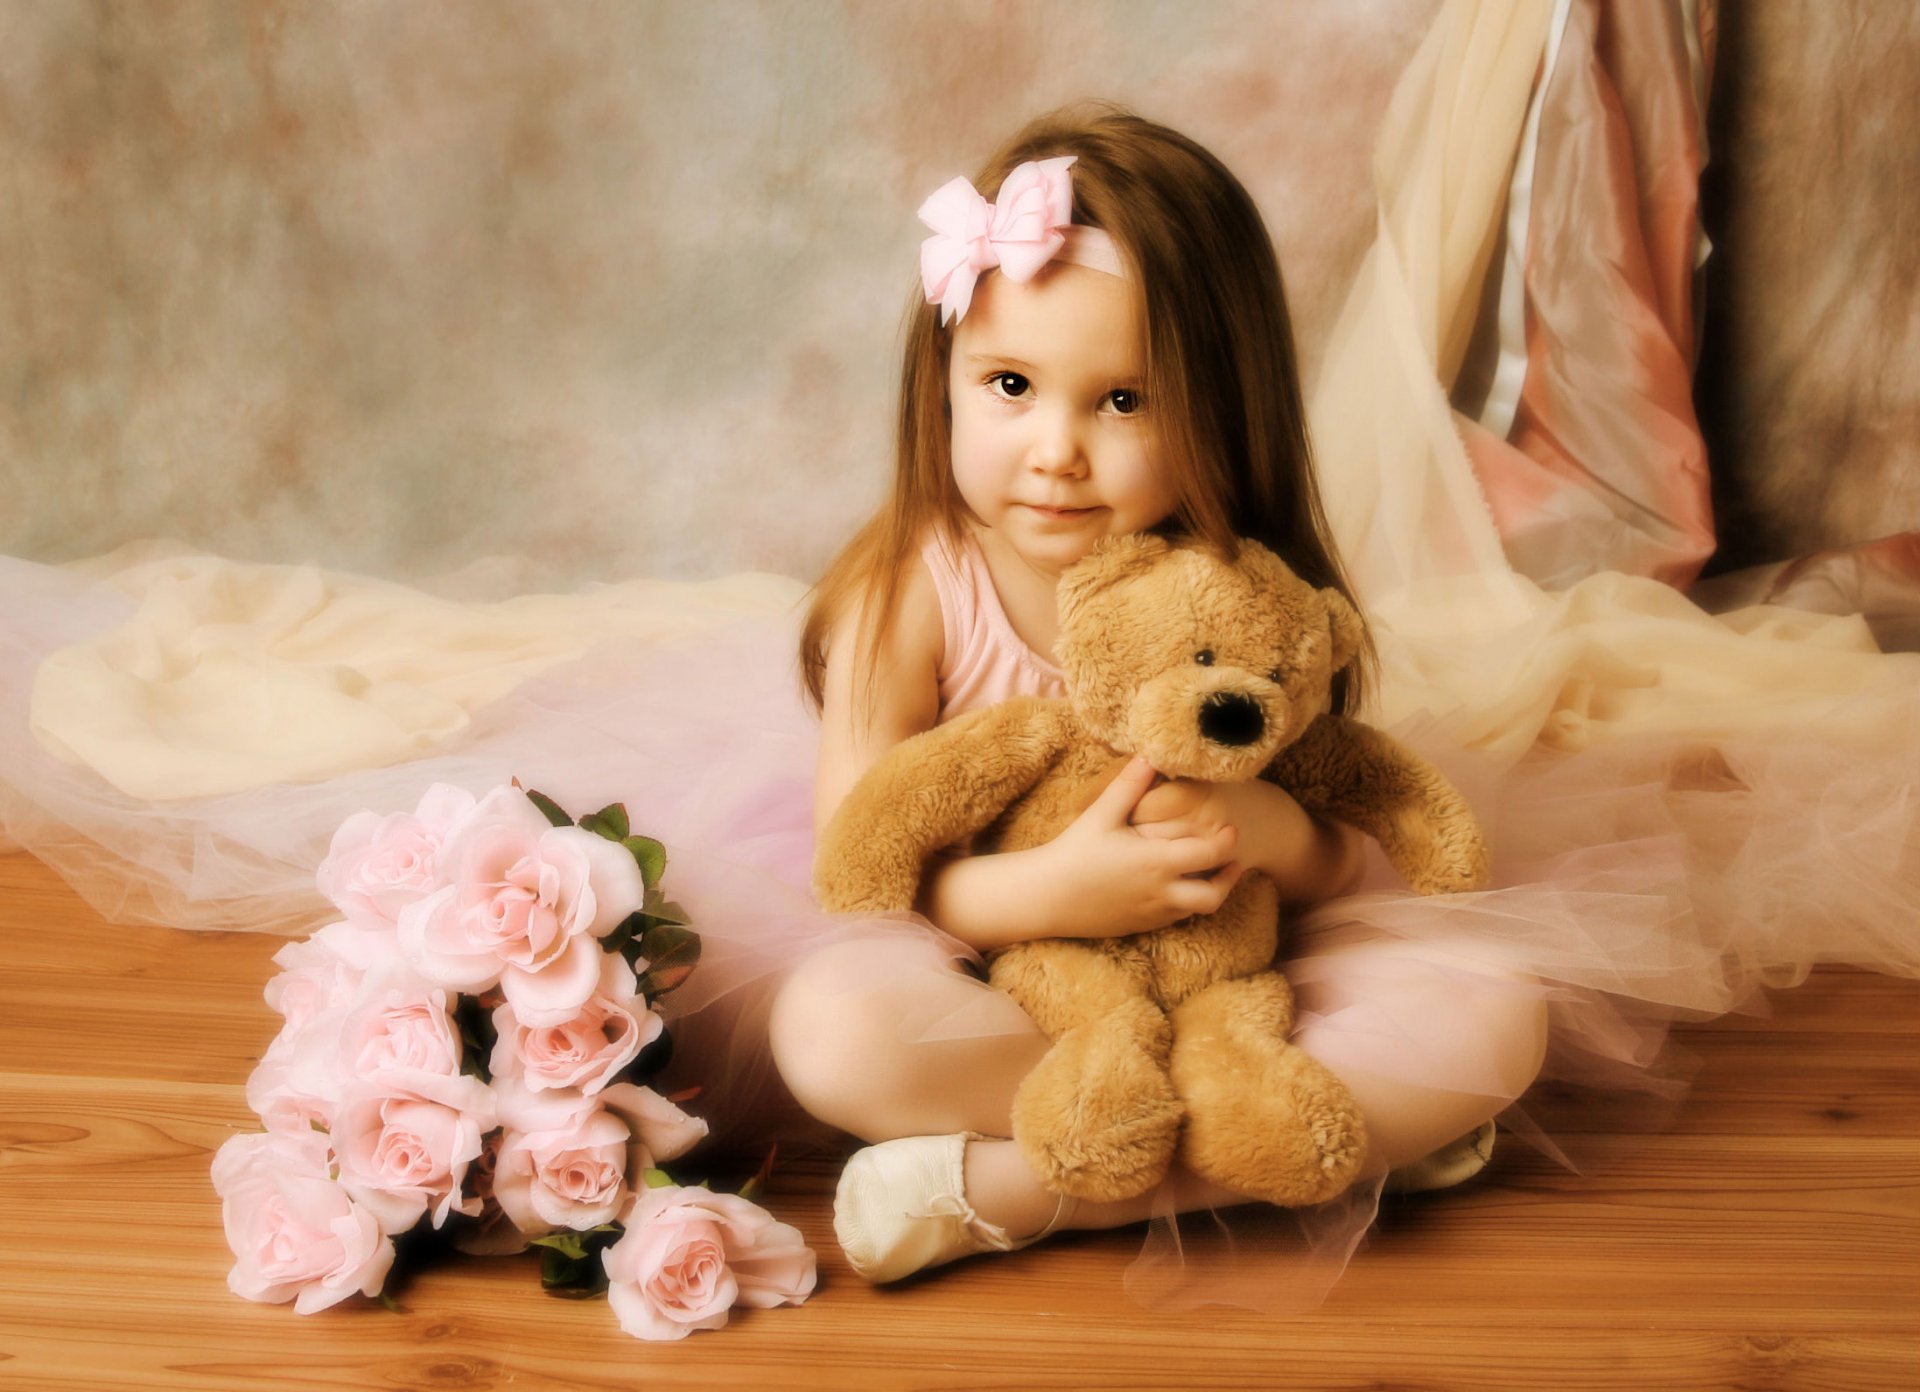 5. Little girl with blond hair and blue eyes holding a teddy bear - wide 7